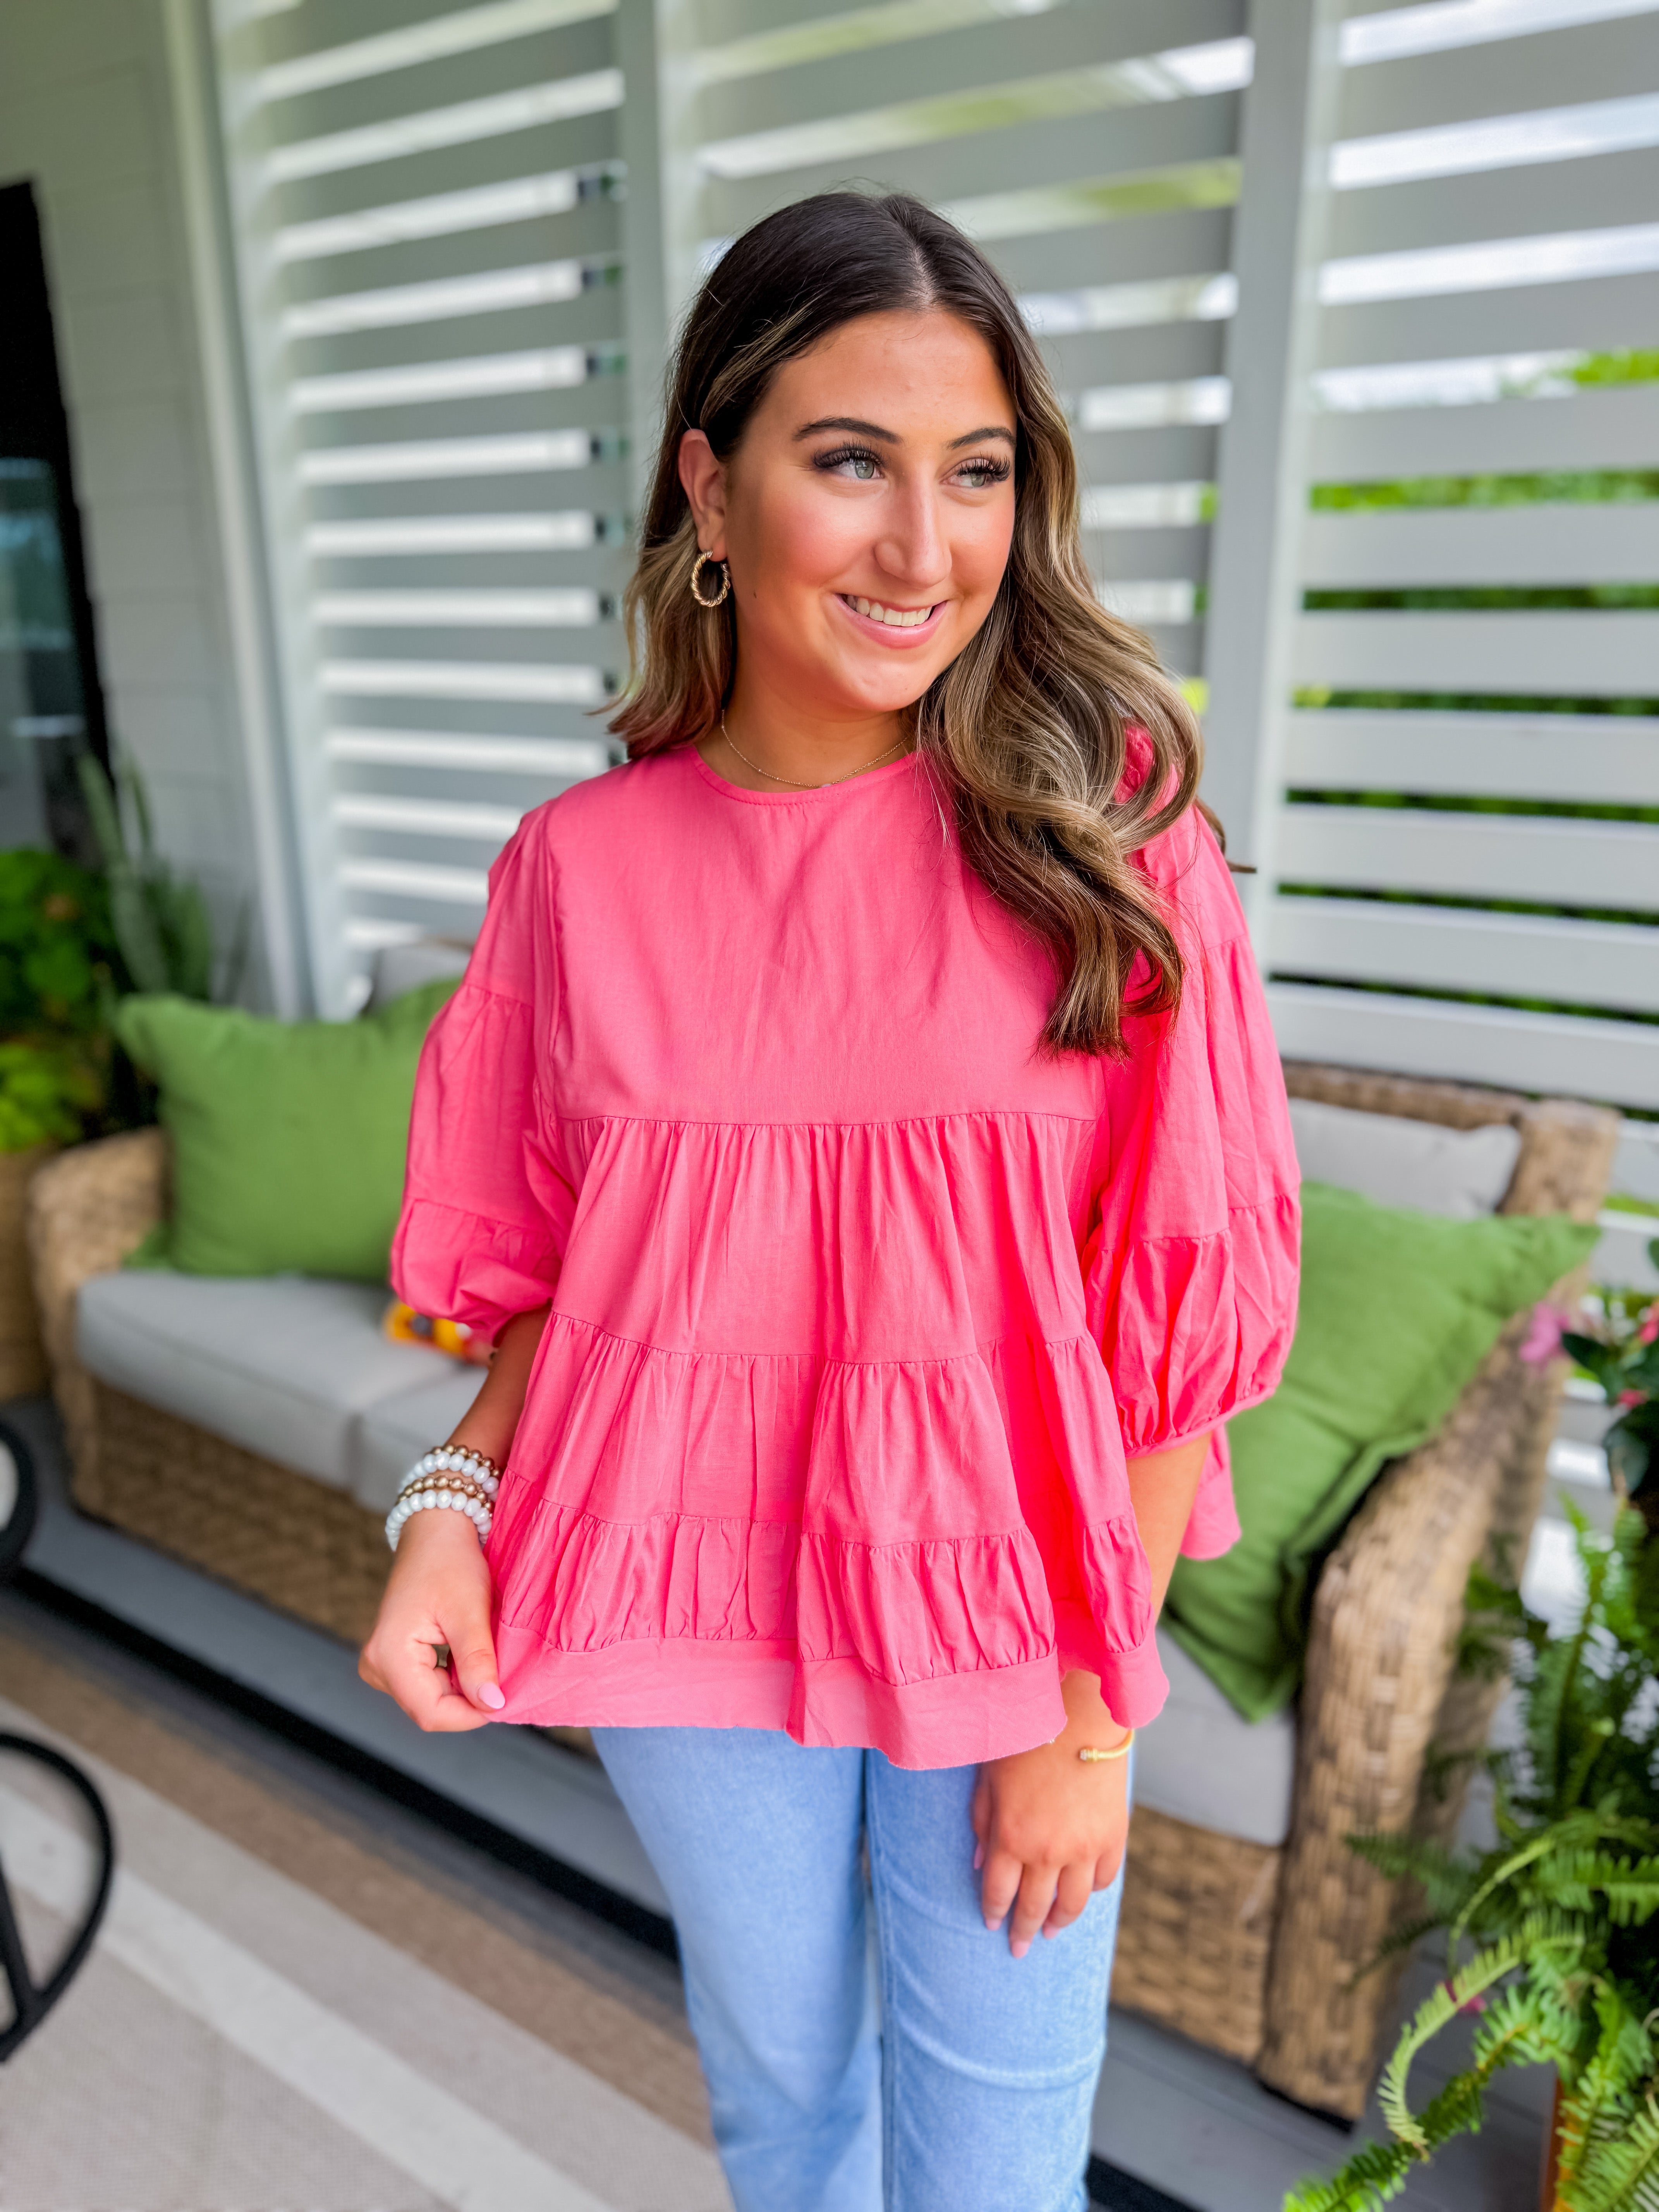 Coral Tiered Top